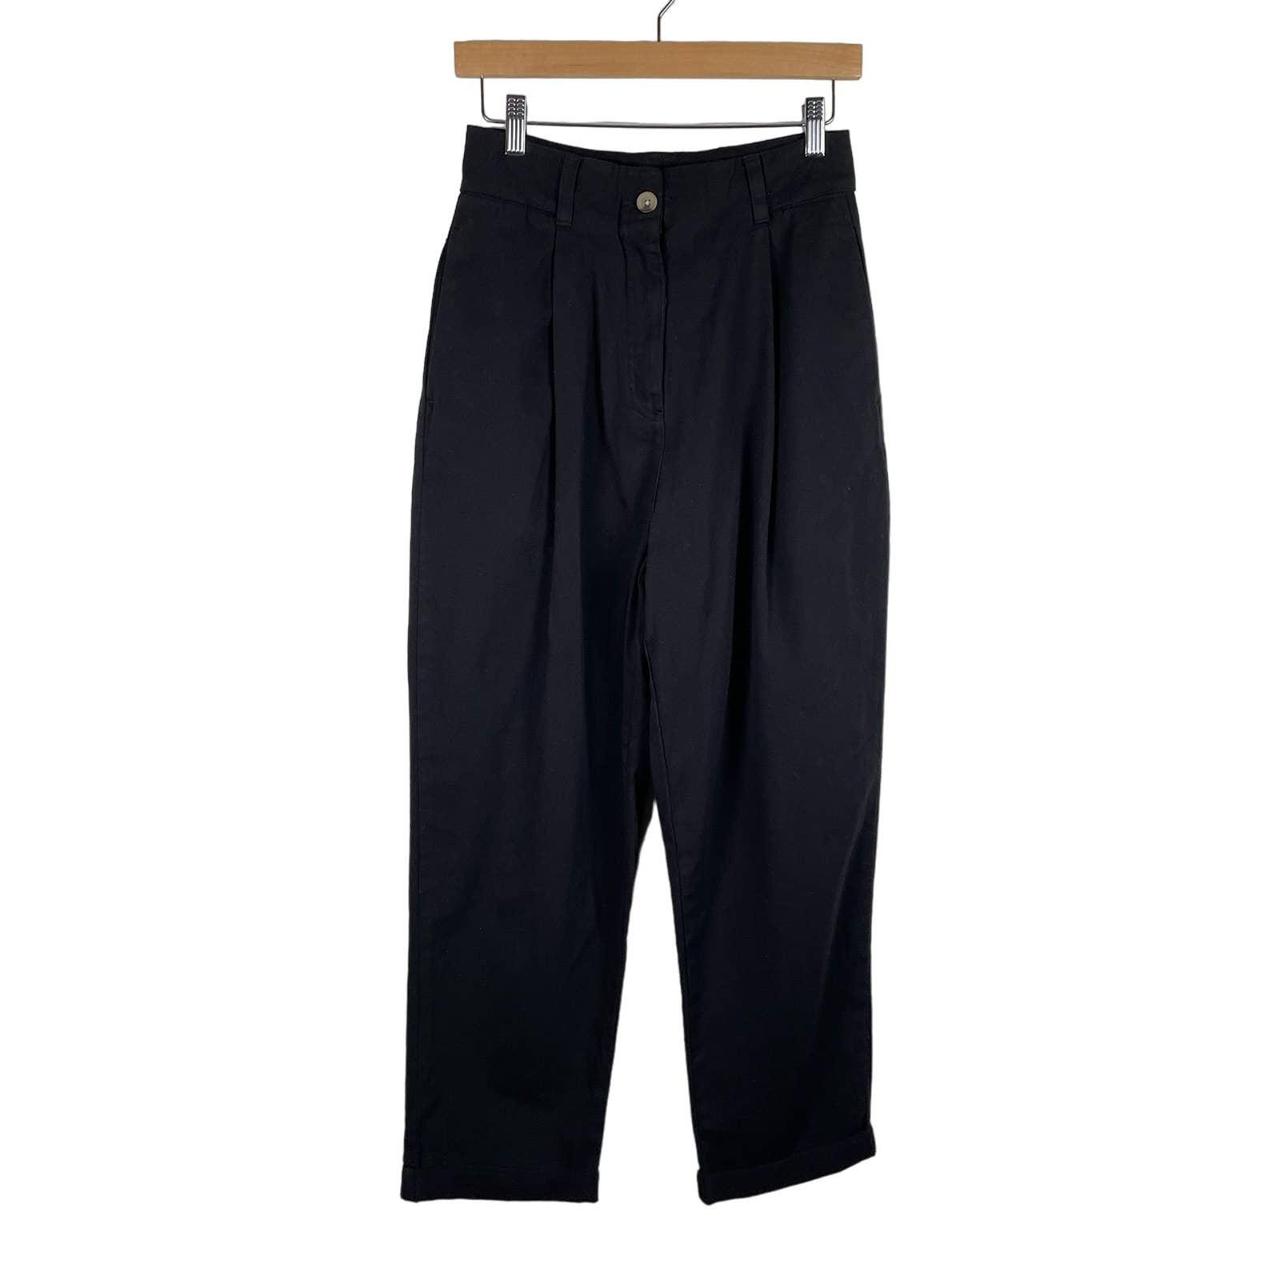 Topshop linen look wide leg relaxed pants in black - part of a set -  ShopStyle